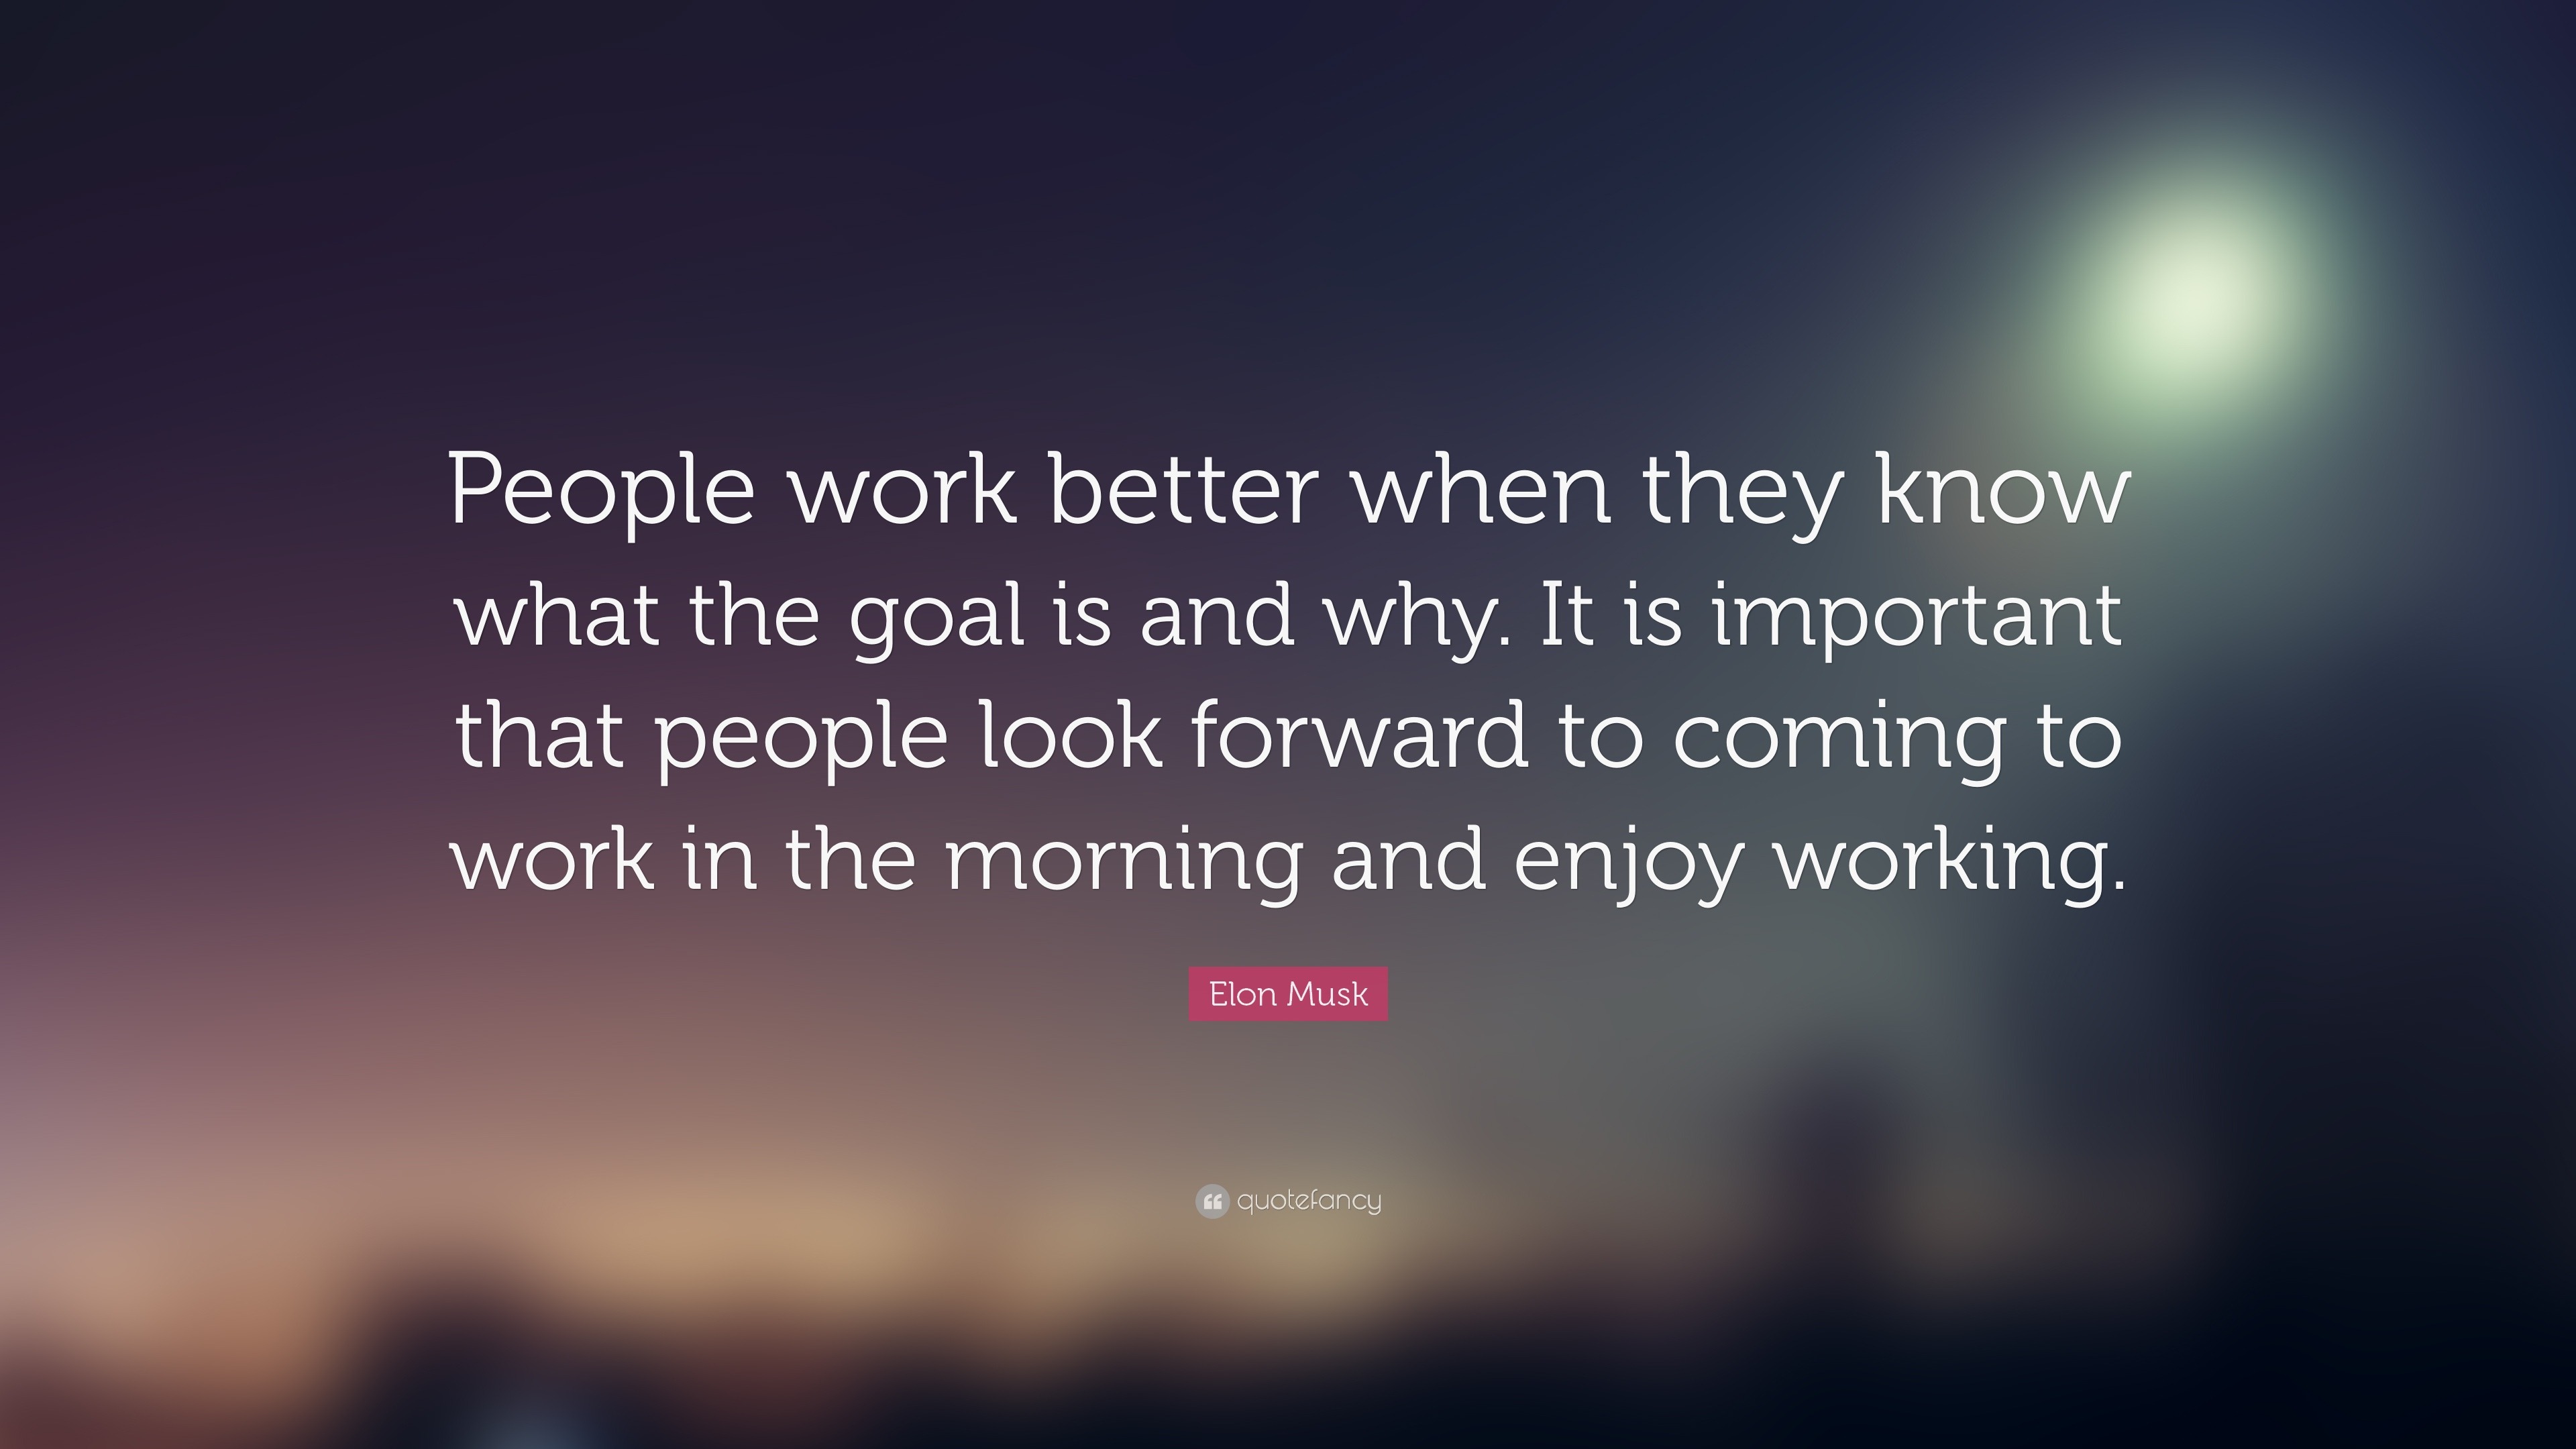 Elon Musk Quote: “People work better when they know what the goal is ...